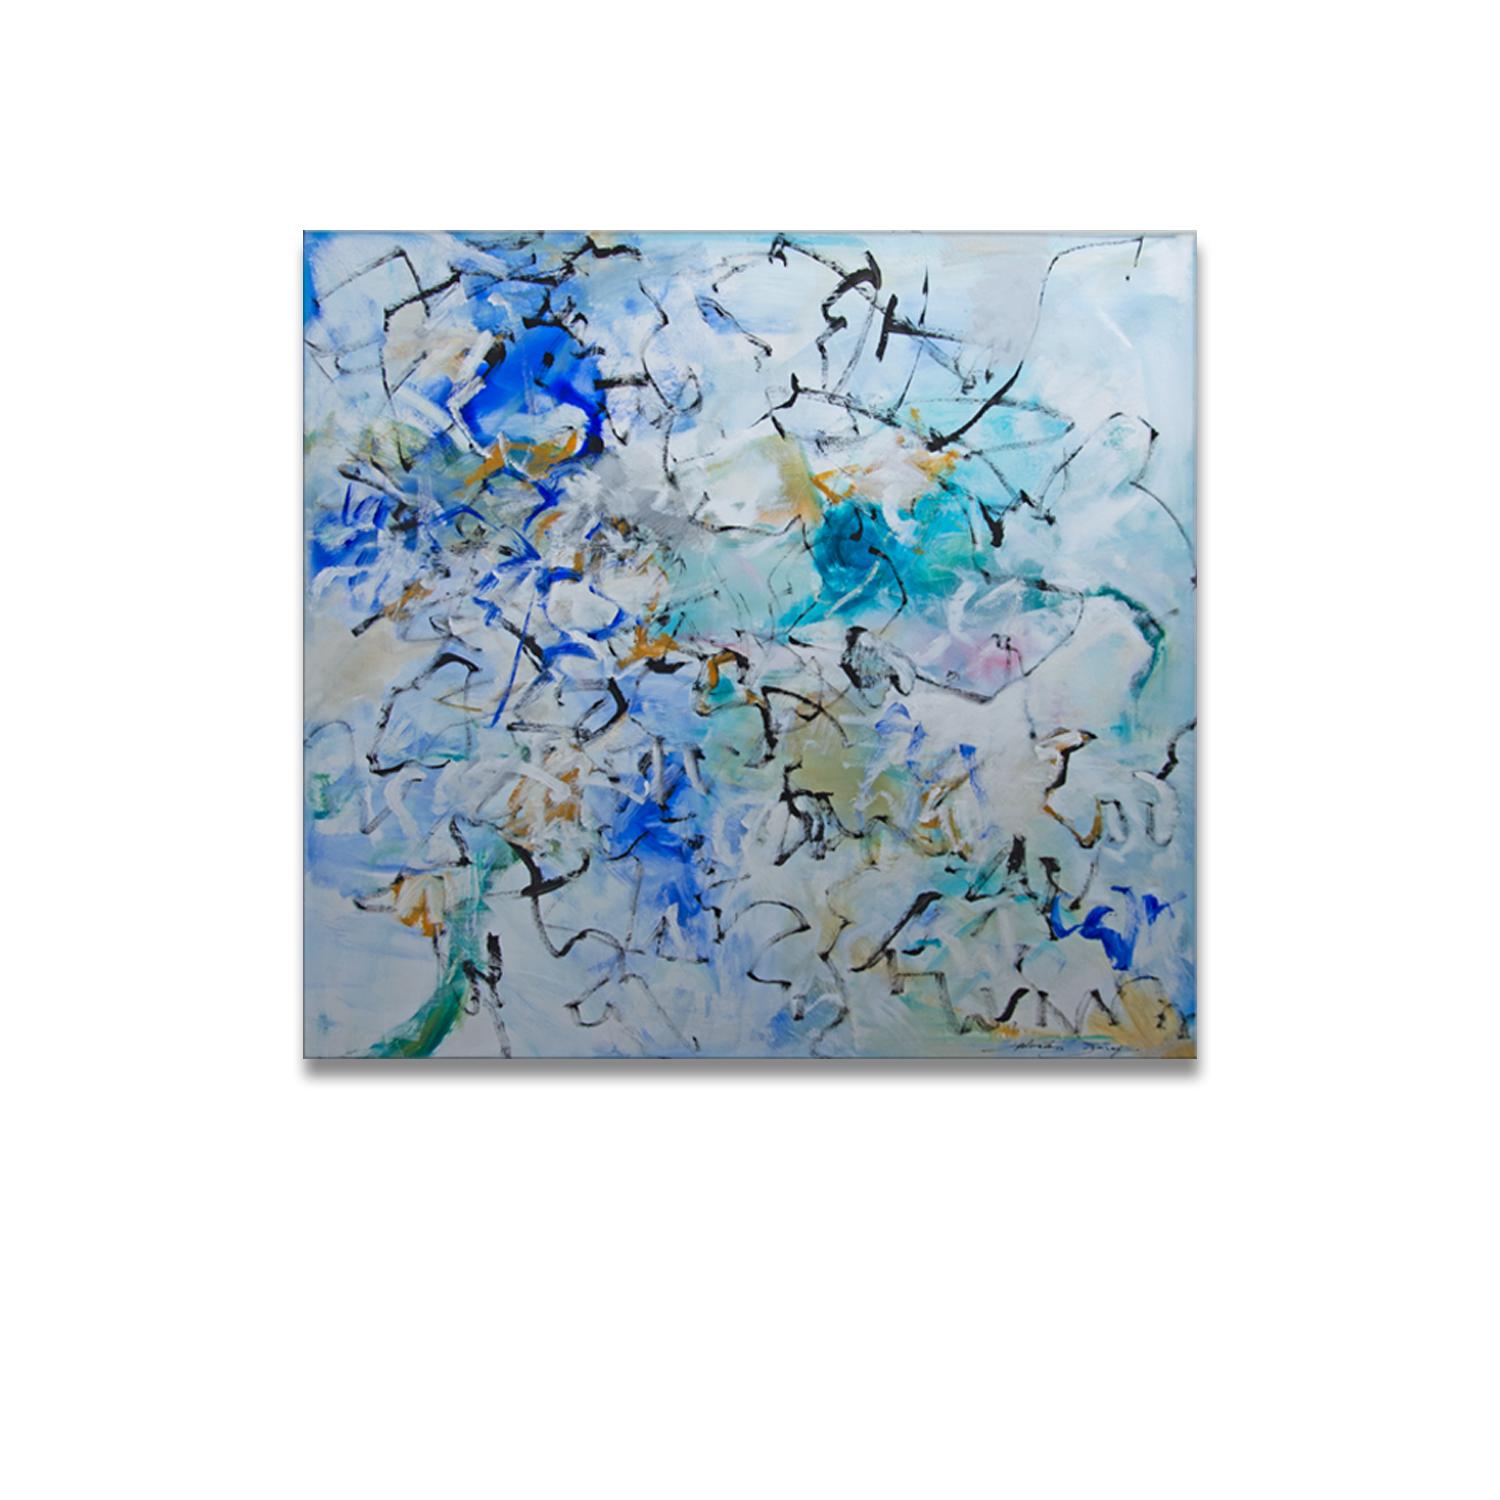 "Untitled I" original artwork by renowned artist Salvatore Principe, is unmistakably bold and contemporary. The abstract piece features the colors blue, purple, yellow, and white while utilizing a combination of hard lines and soft blending,